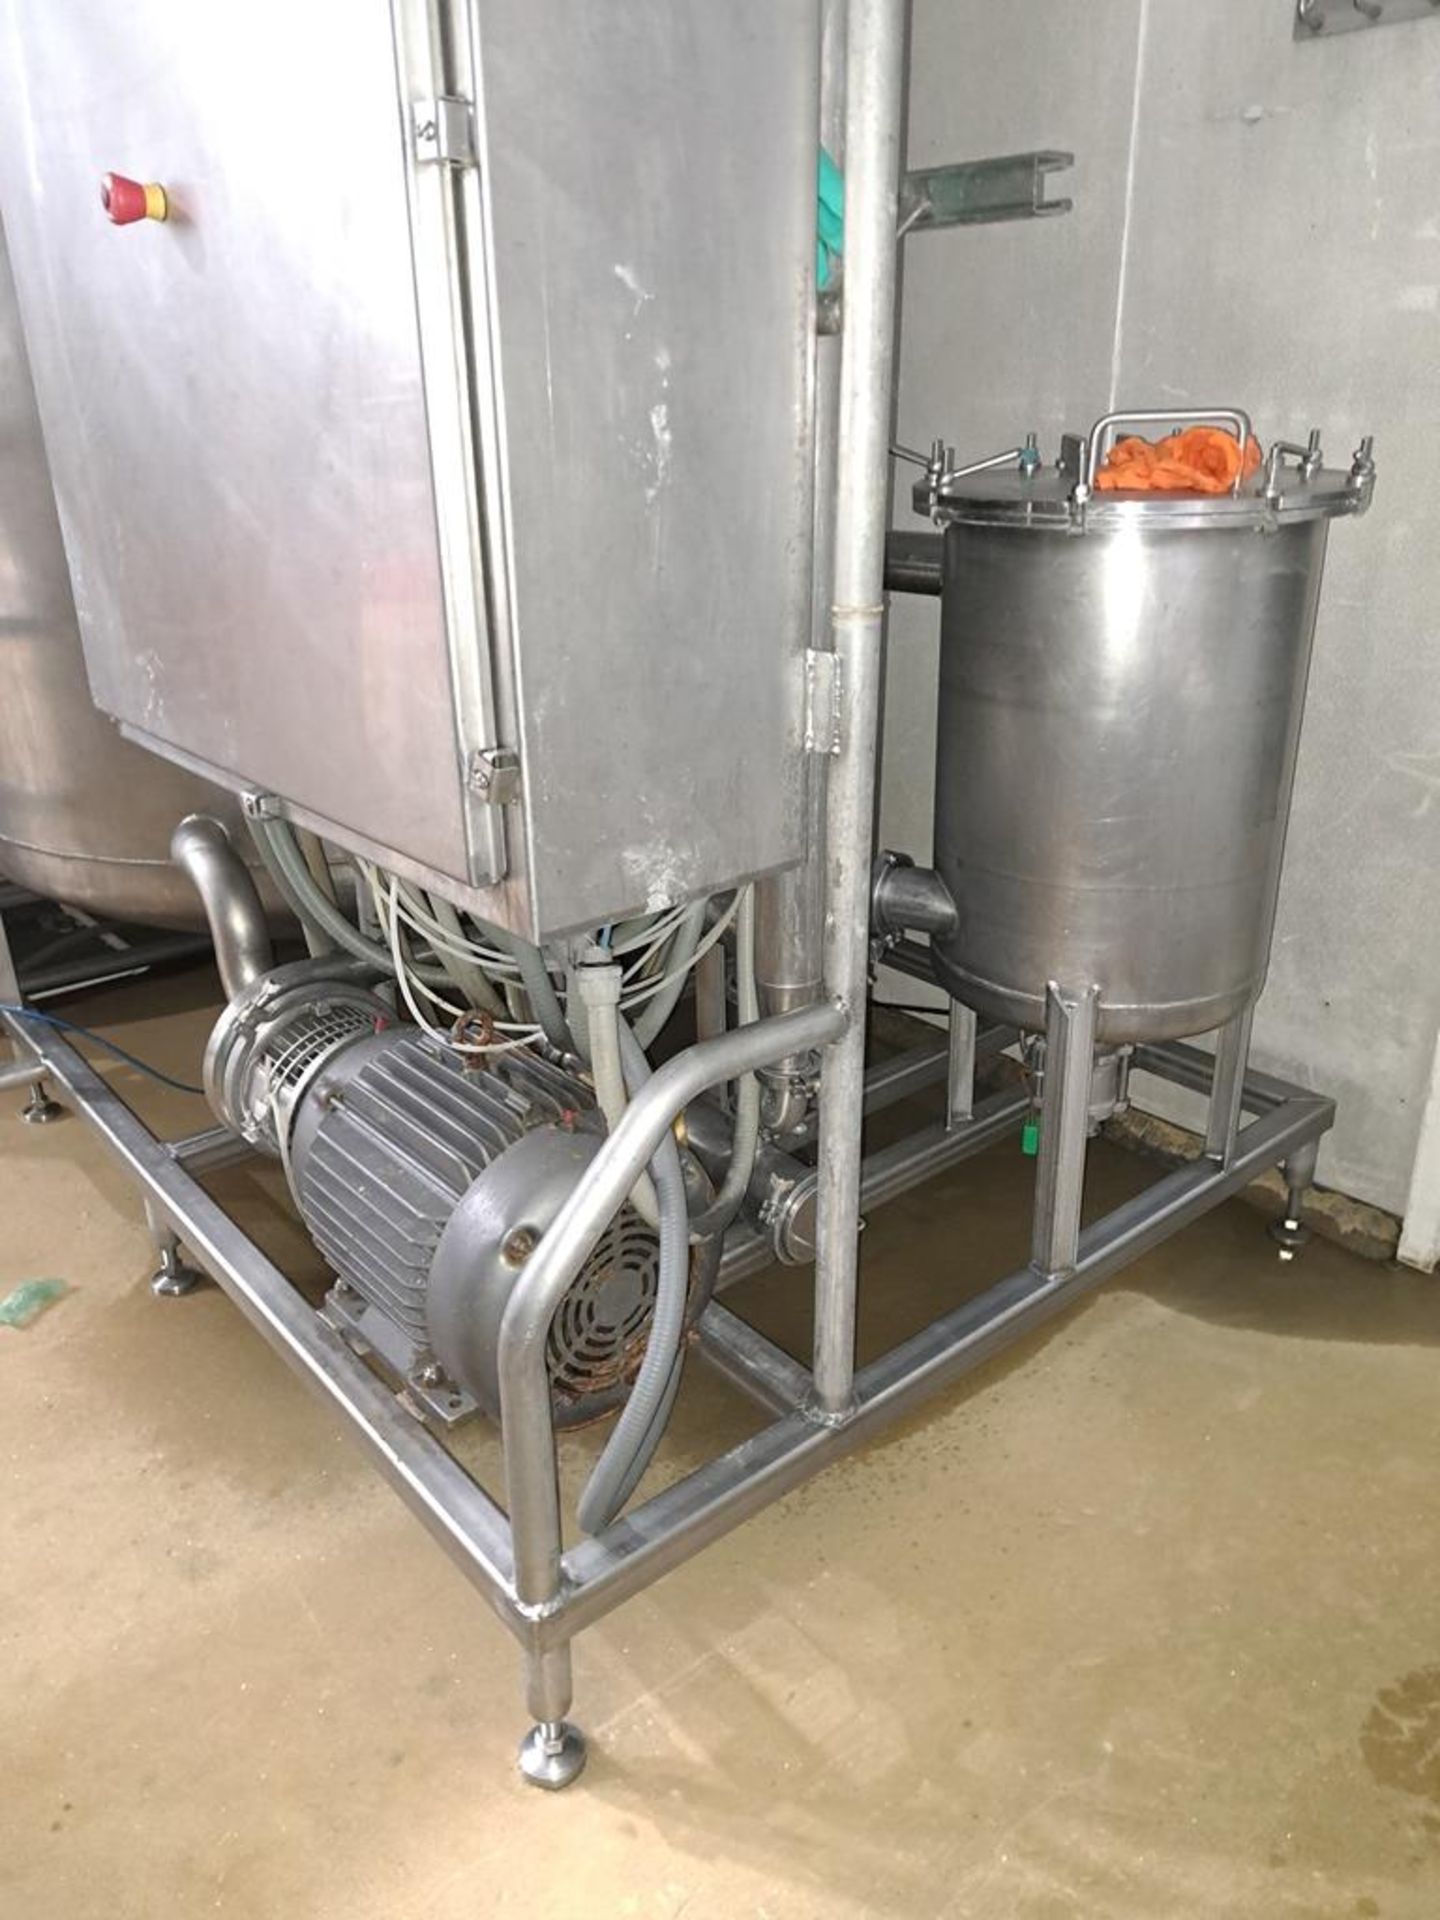 Stainless Steel Single Wall Tank, 5' Dia. X 5' D, 230/460 volt motor on stainless steel - Image 4 of 4